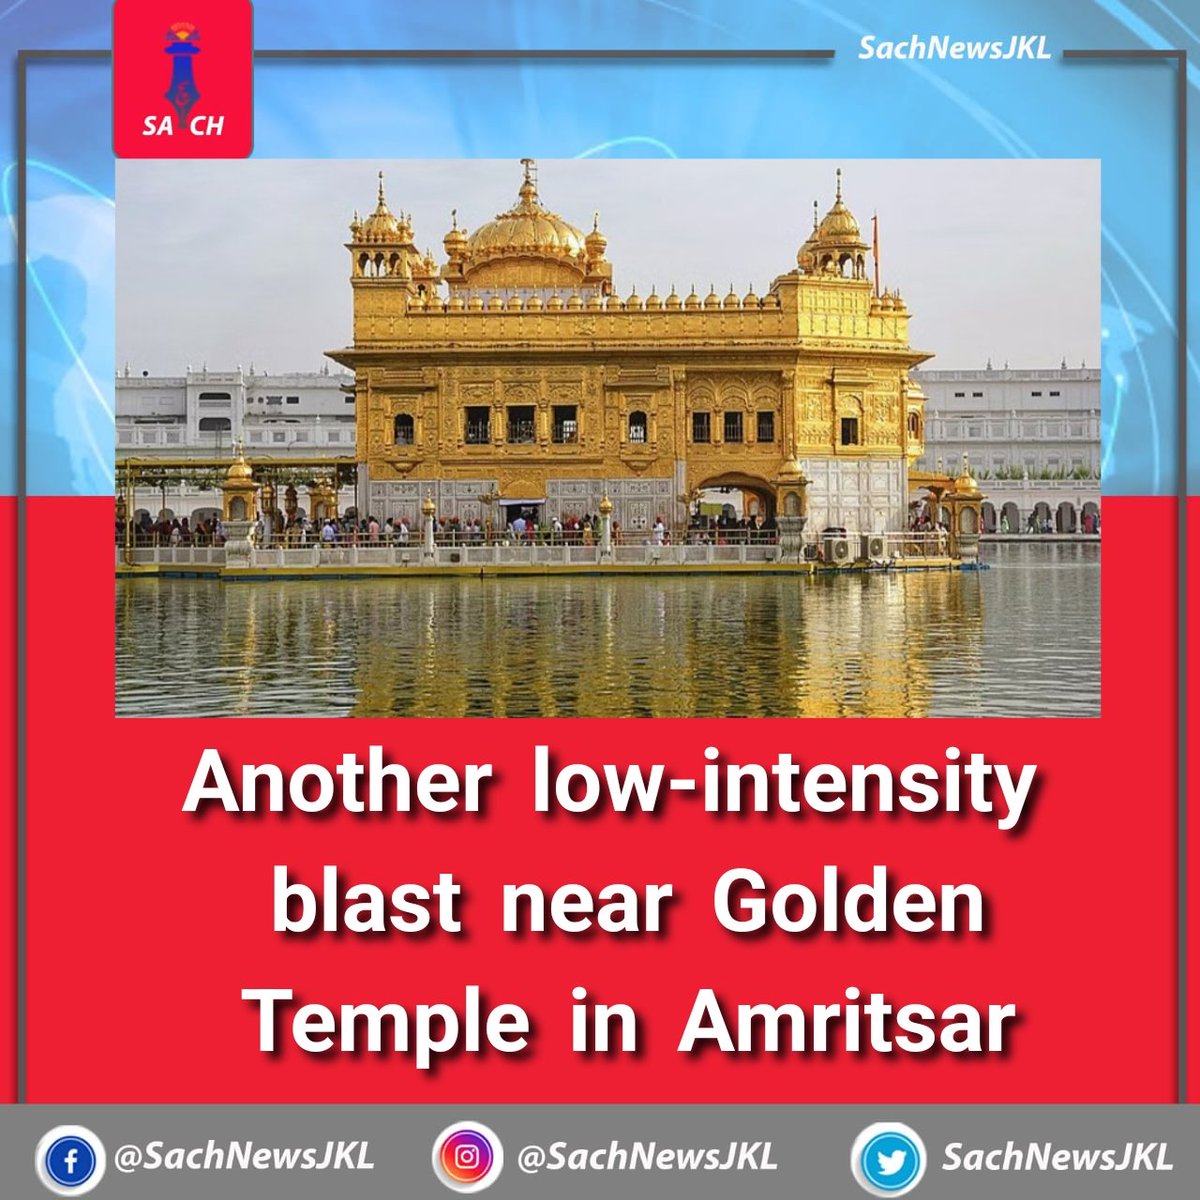 Another low-intensity blast near Golden Temple in Amritsar

This is the third explosion in less than a week.

#sachnewsjkl #blast #amritsar #goldentrmple 
#lowintensity #dailysach